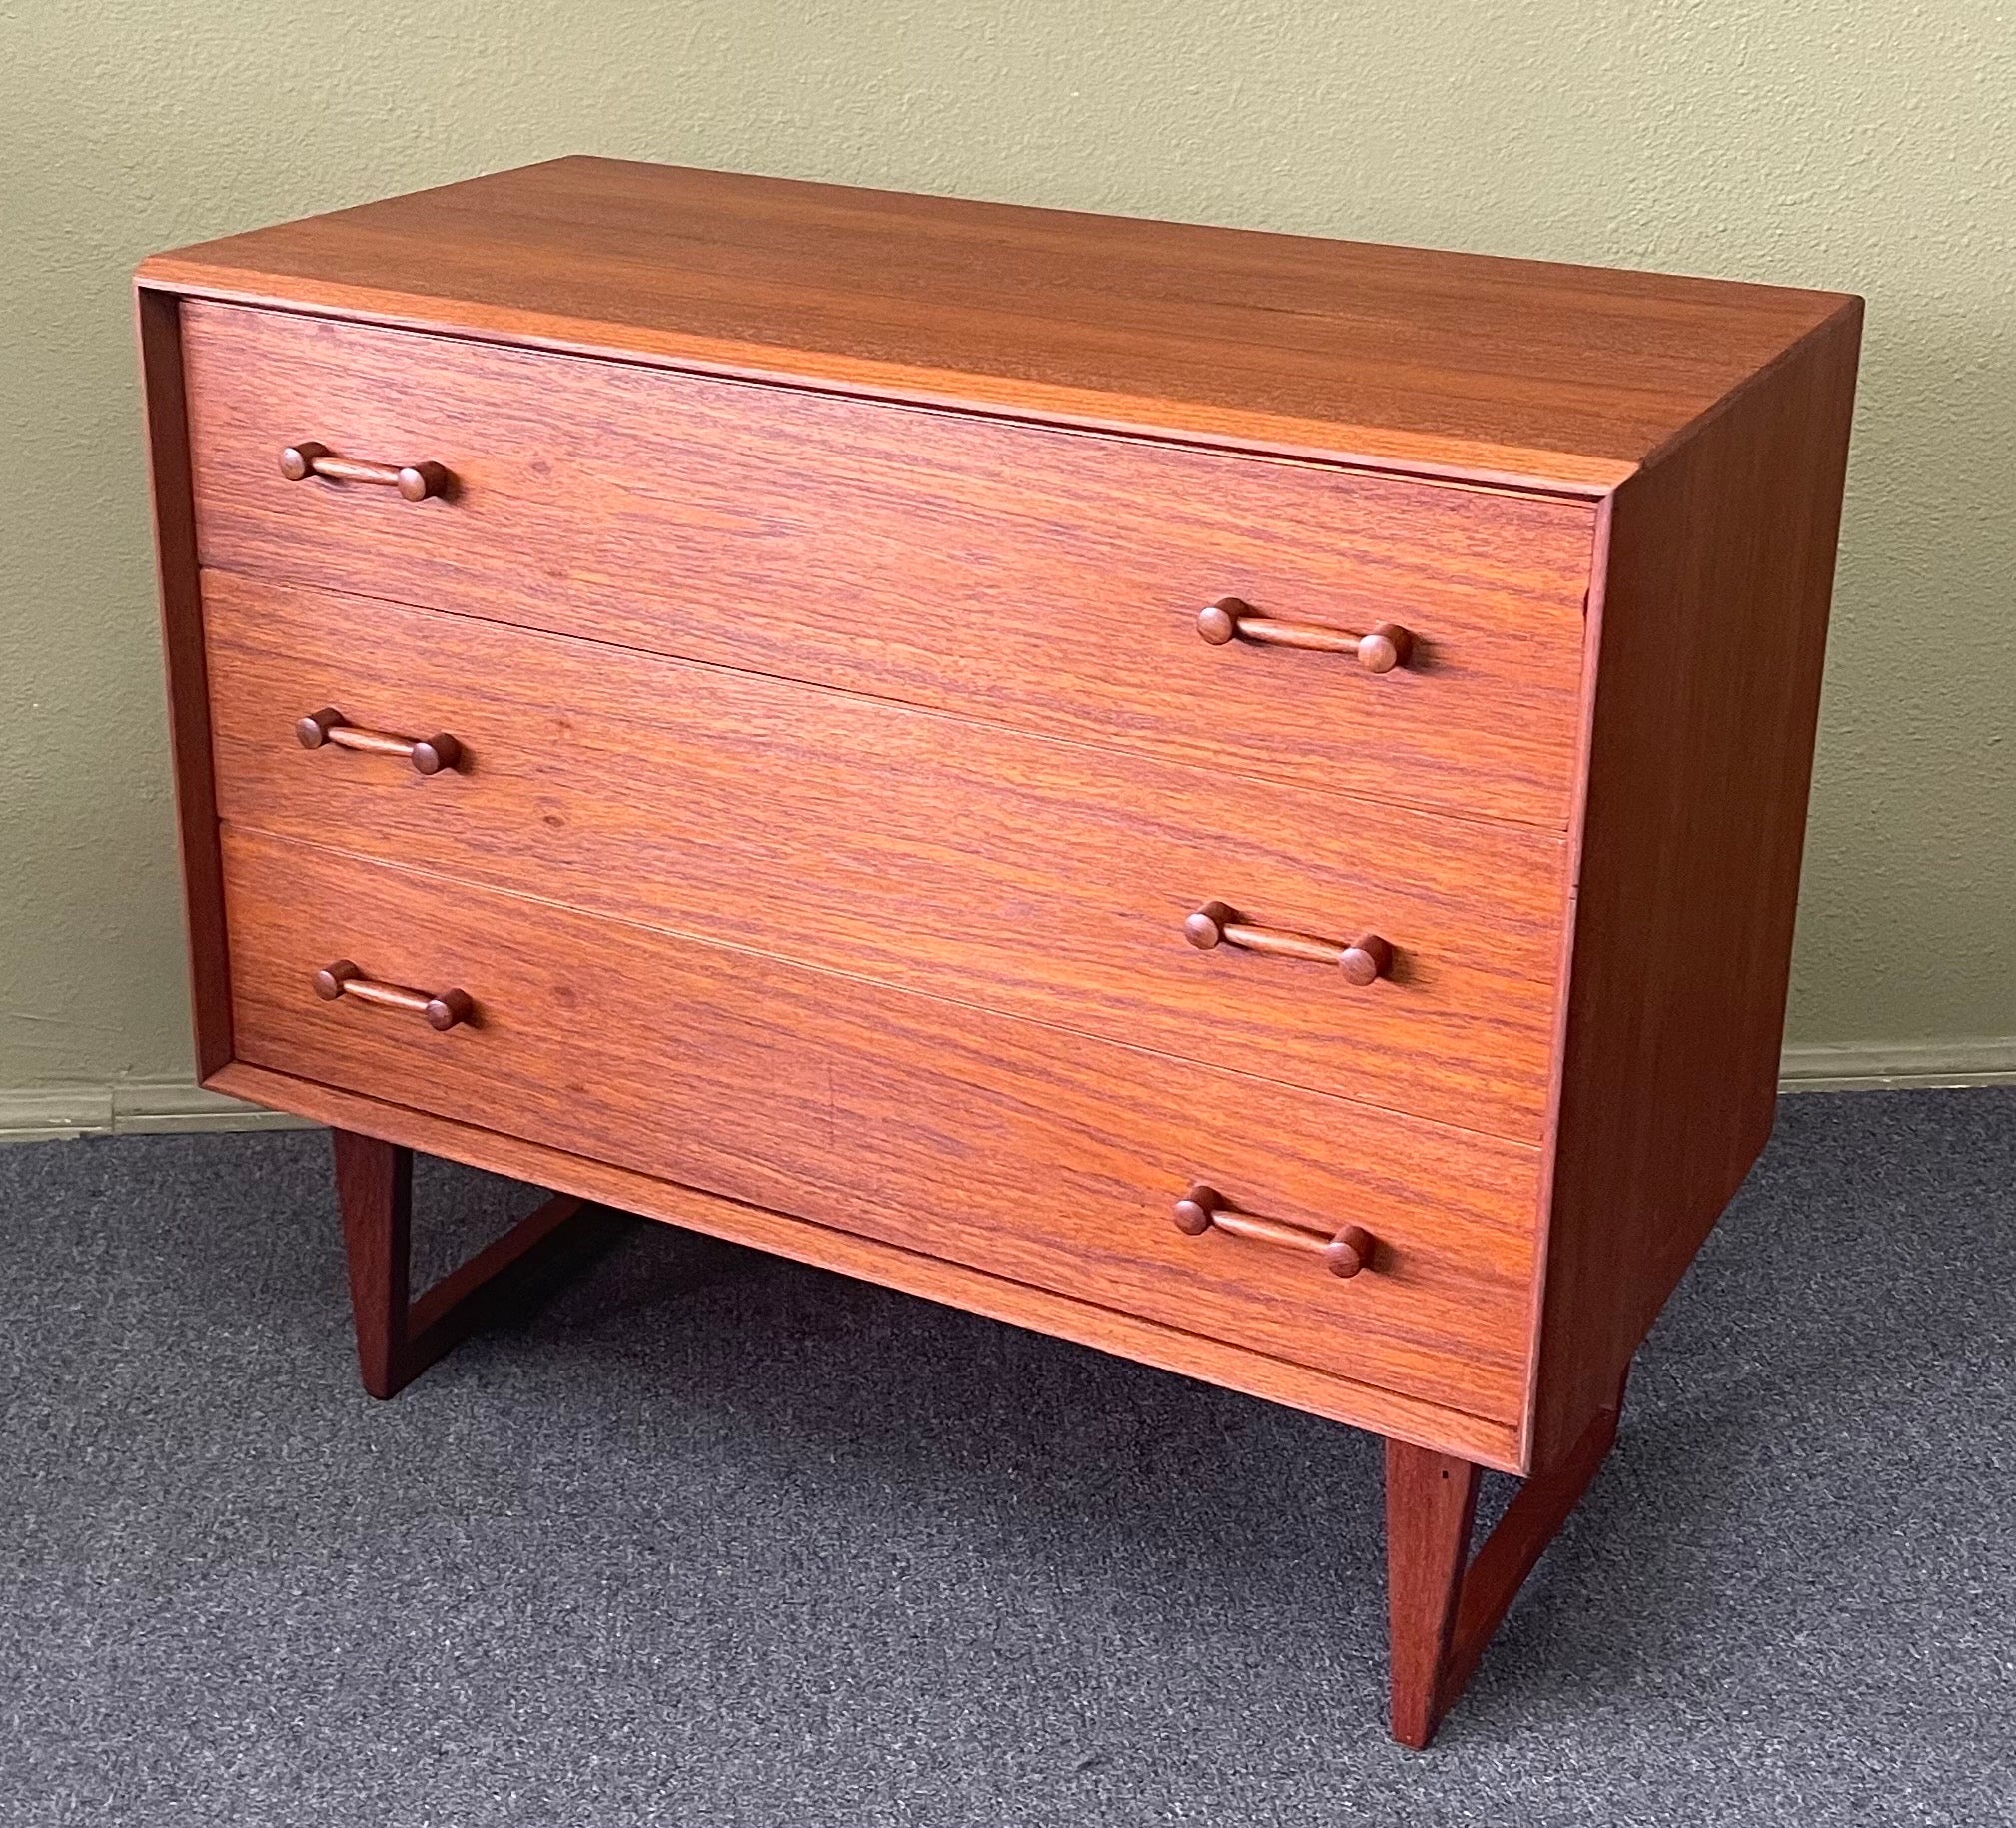 Absolutely gorgeous Danish modern three-drawer teak dresser / chest by Borge Mogensen, circa 1960s. The piece has been professionally refinished and looks fantastic! It is of superb quality with a beveled edge front, dove tailed drawers and a